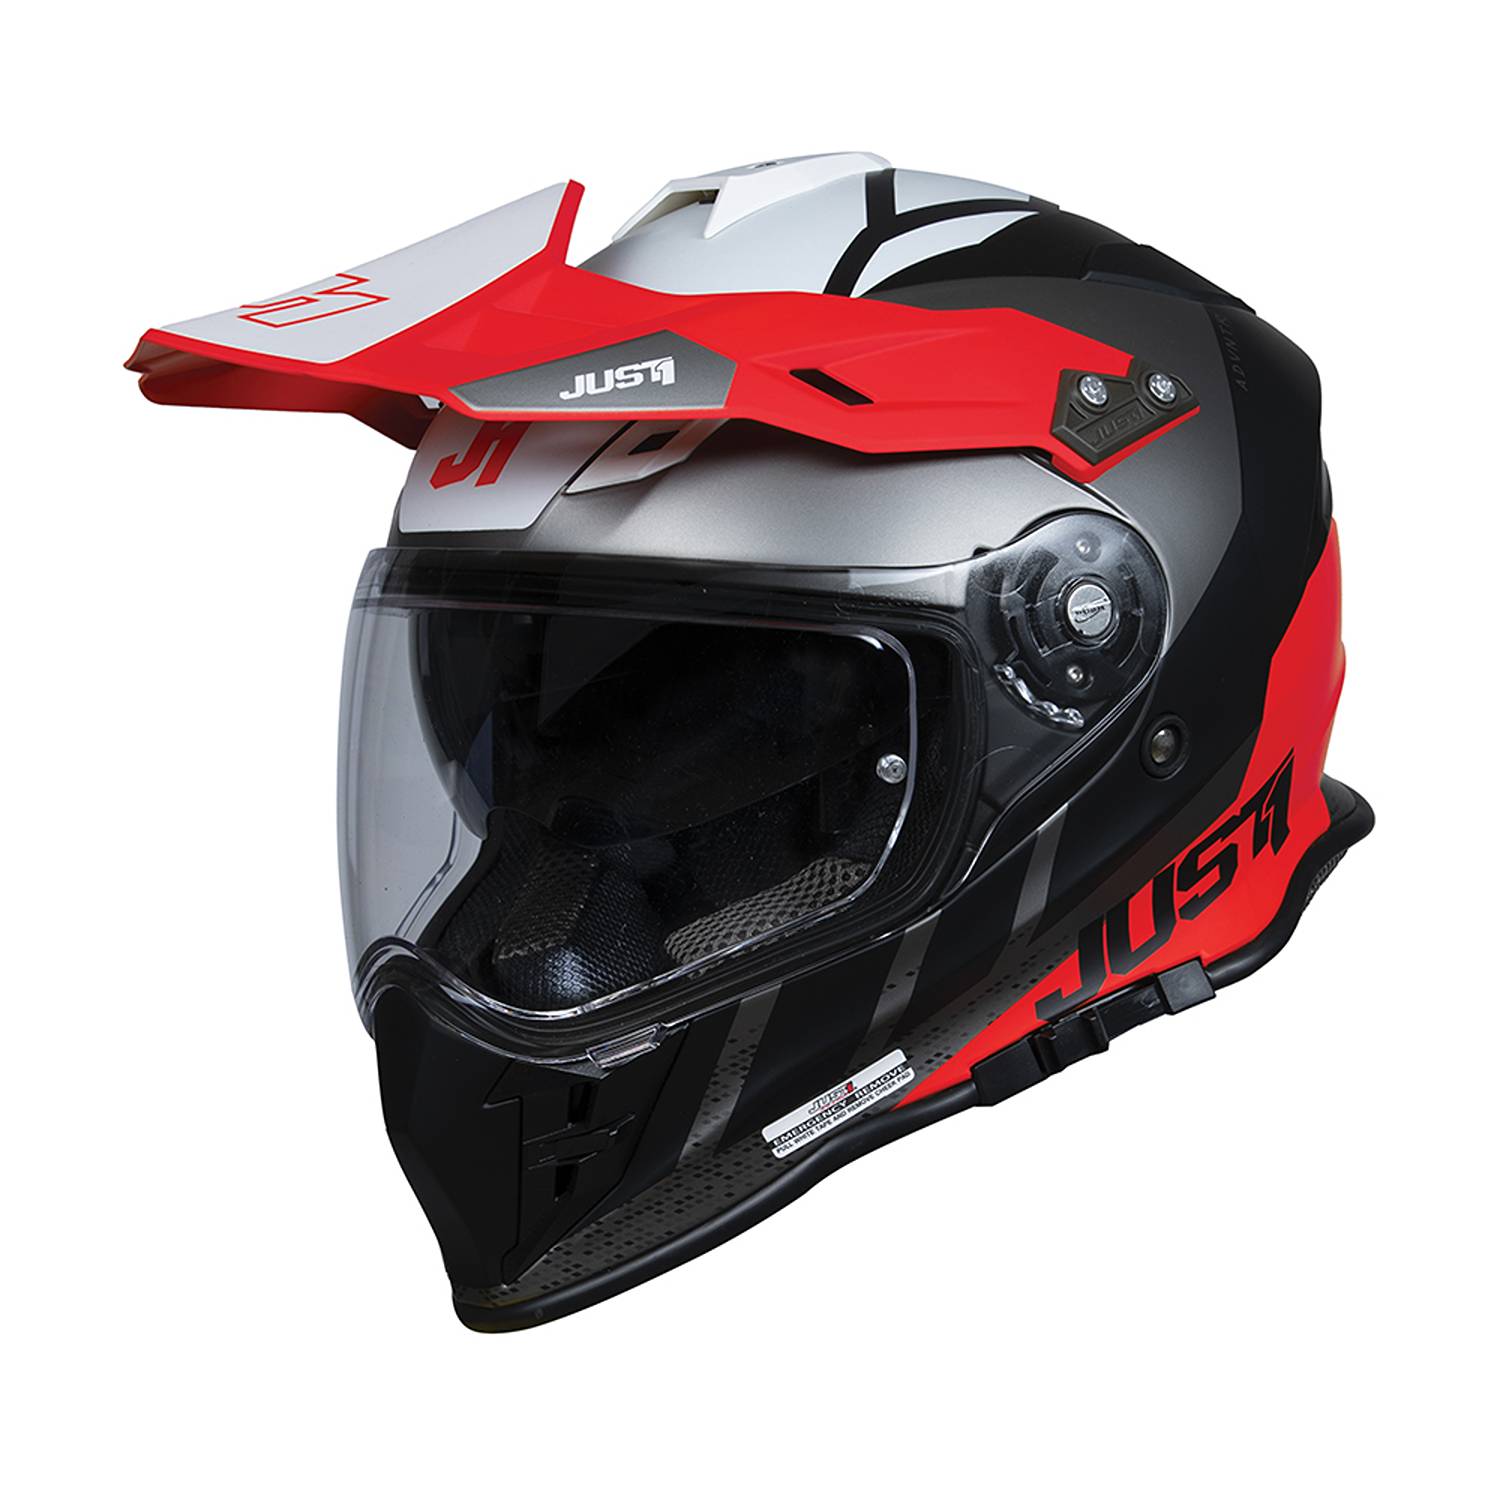 Image of Just1 J34 Pro Outerspace Black Red White Adventure Helmet Size S ID 8055774027991